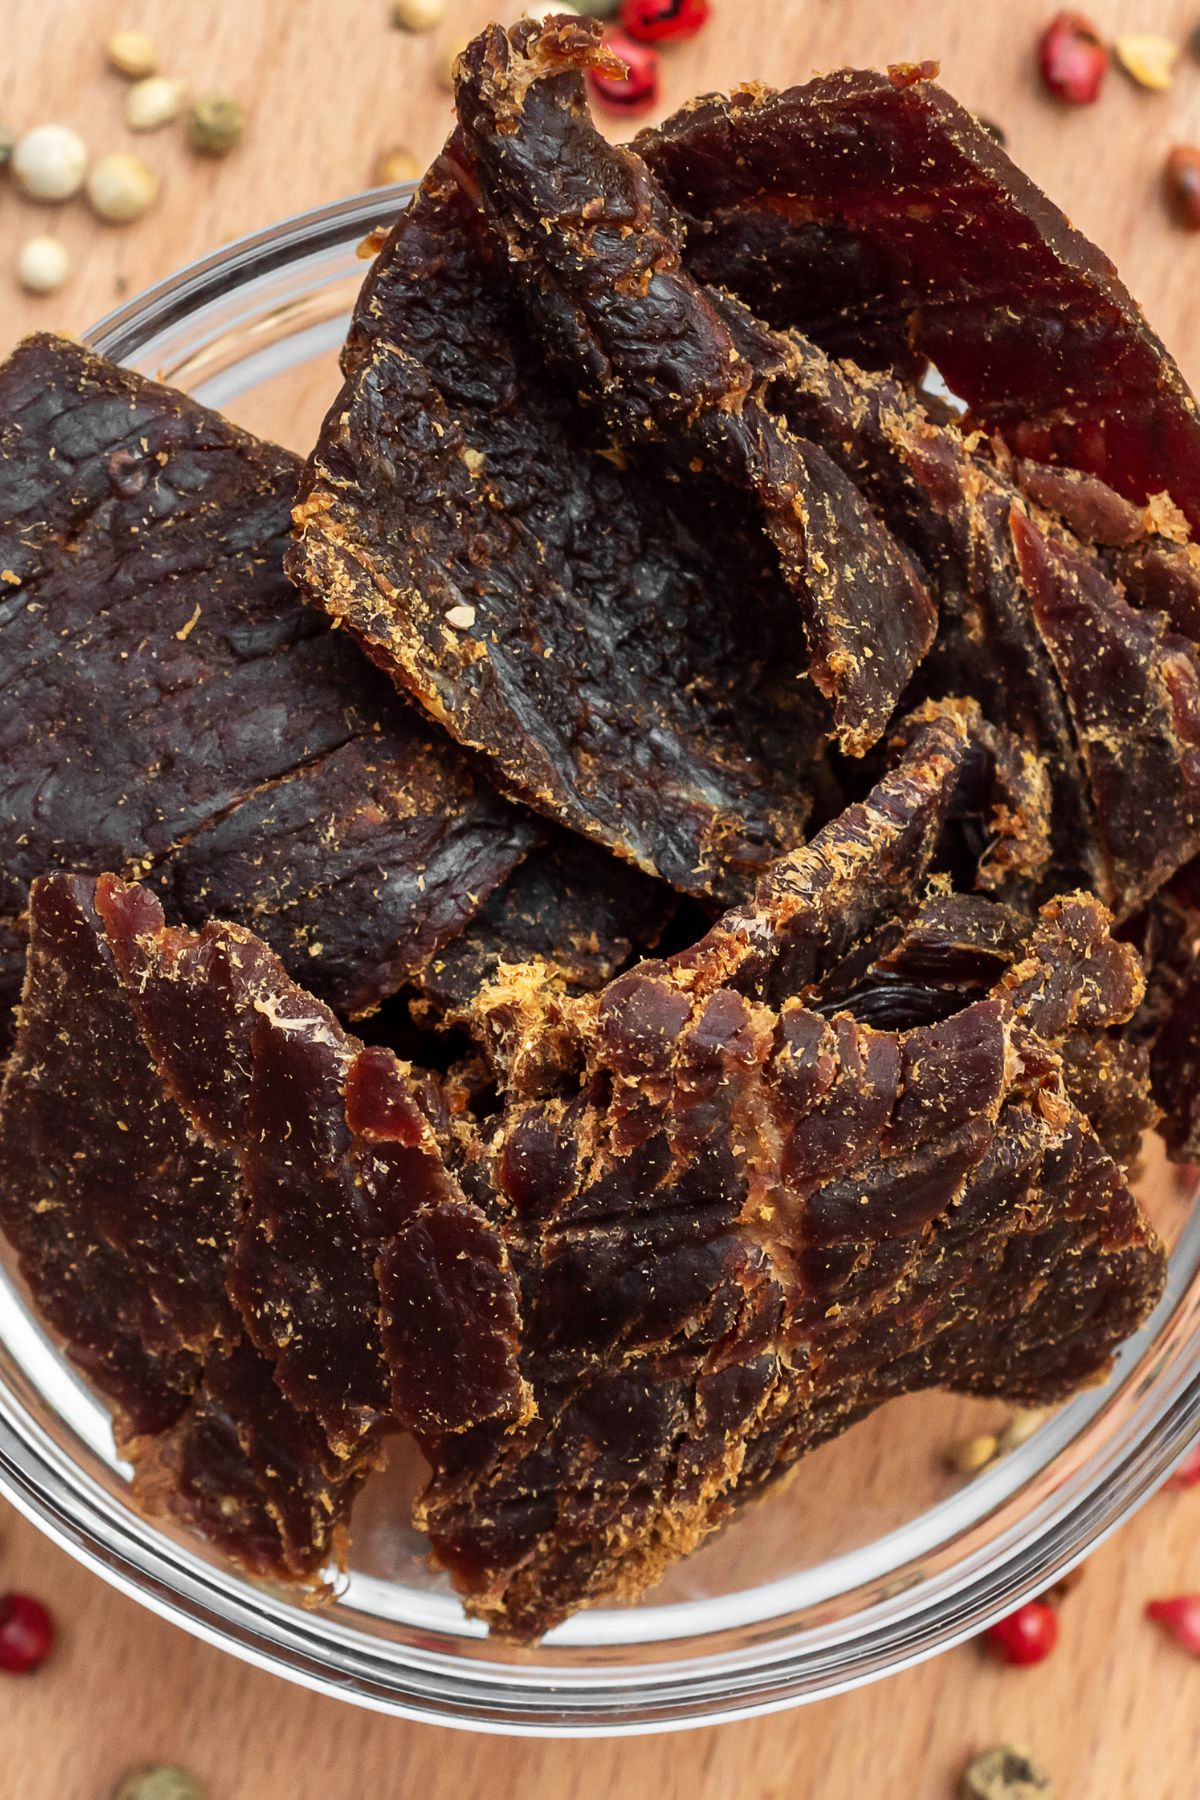 The beef jerky in a glass bowl.